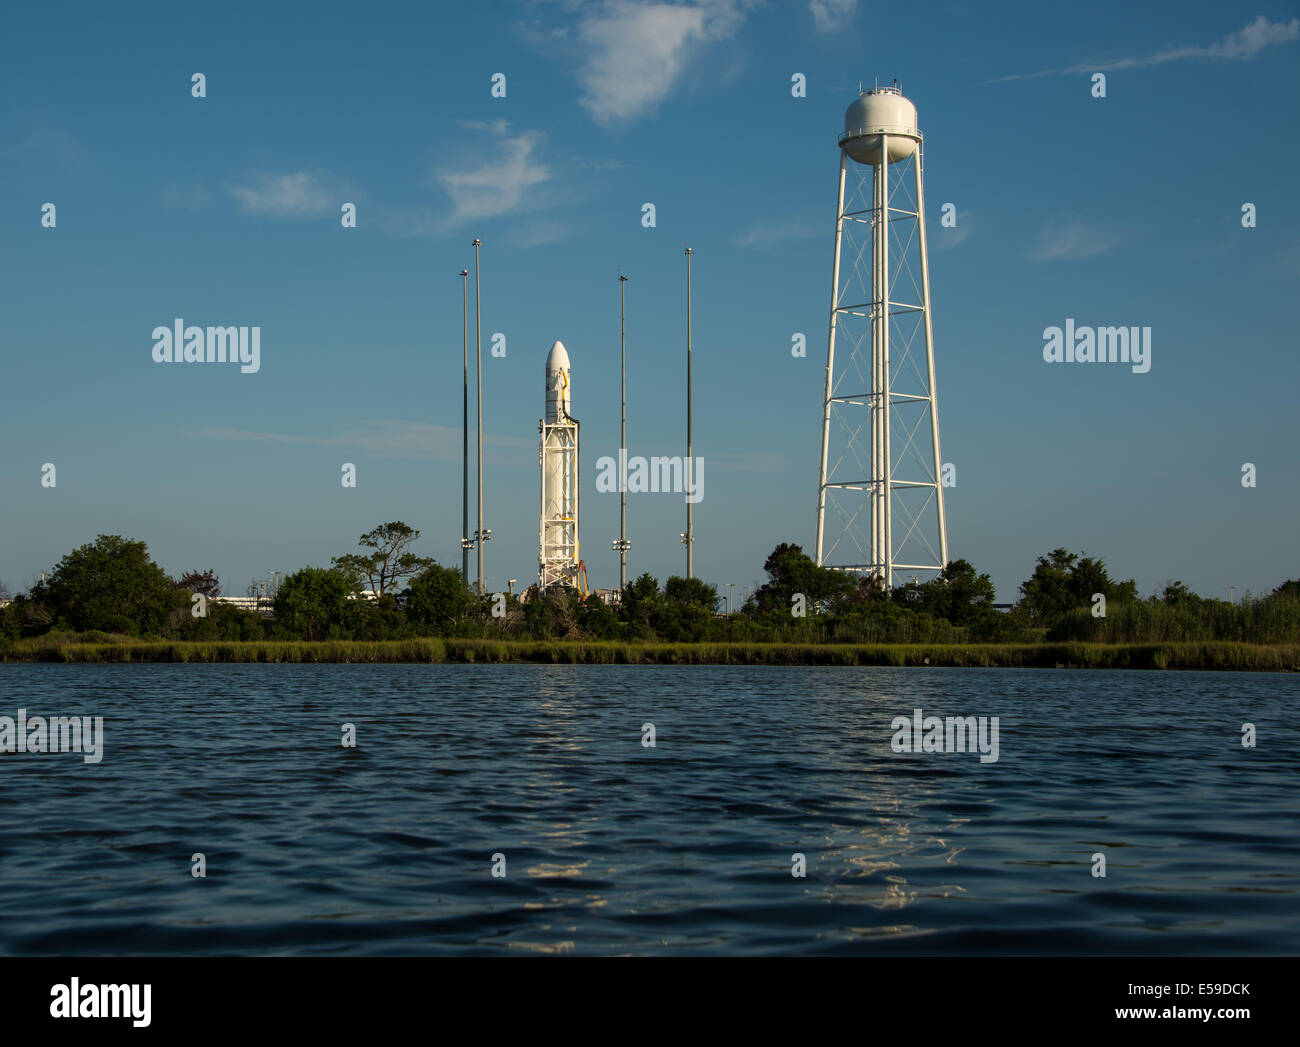 The Orbital Sciences Corporation Antares rocket, with the Cygnus spacecraft onboard, is seen, Saturday, July 12, 2014, at launch Pad-0A of NASA's Wallops Flight Facility in Virginia. The Antares will launch with the Cygnus spacecraft filled with over 3,00 Stock Photo